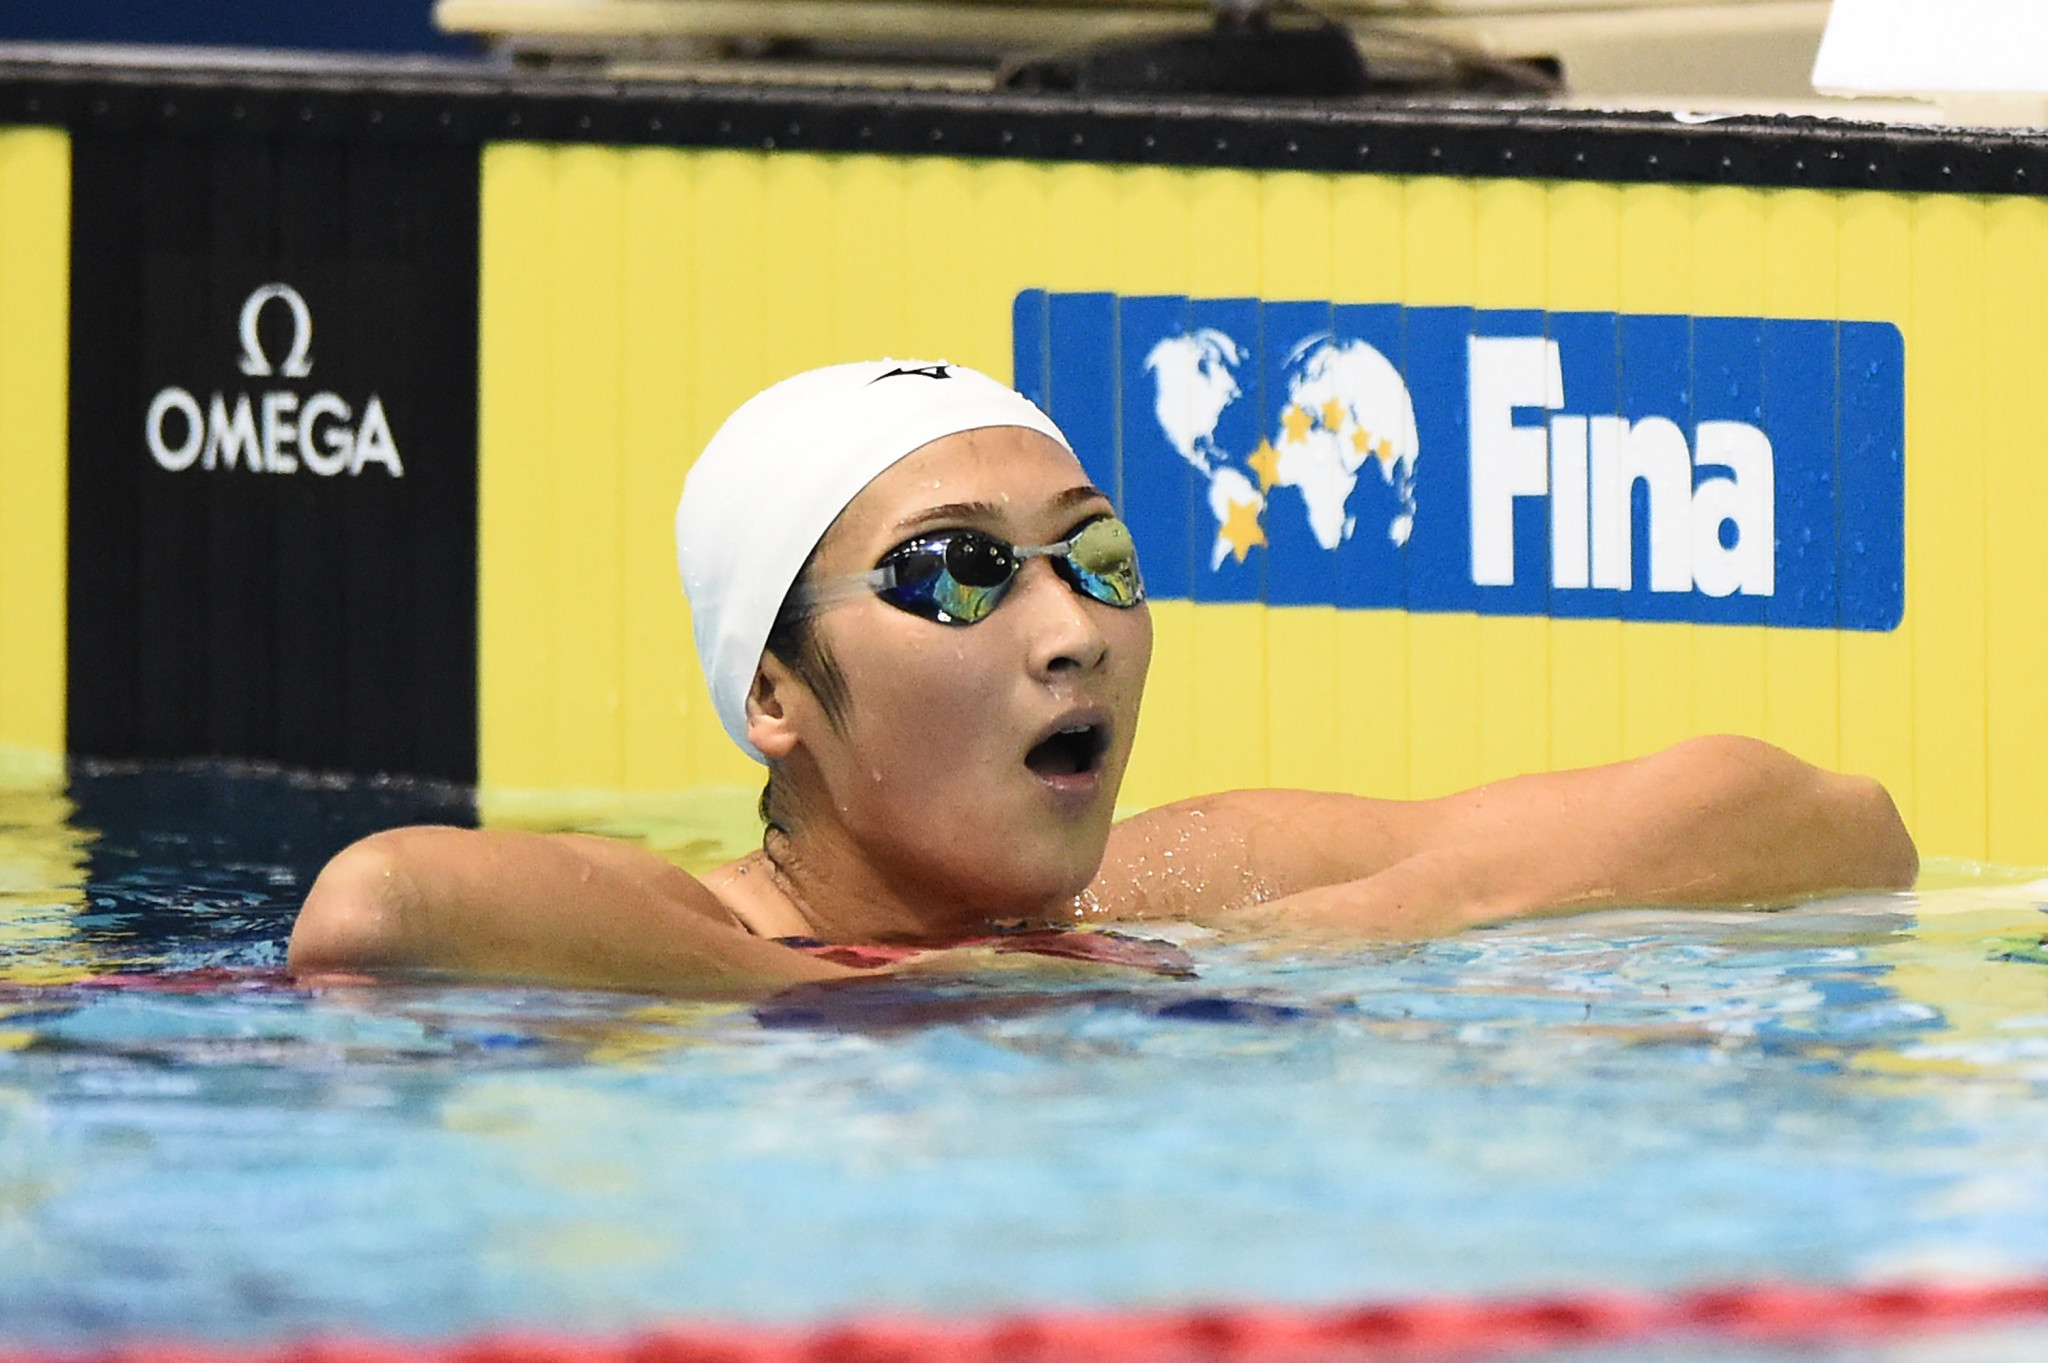 Japanese swimming star Rikako Ikee has described battling leukemia as "several thousand times harder than I imagined" ©Getty Images